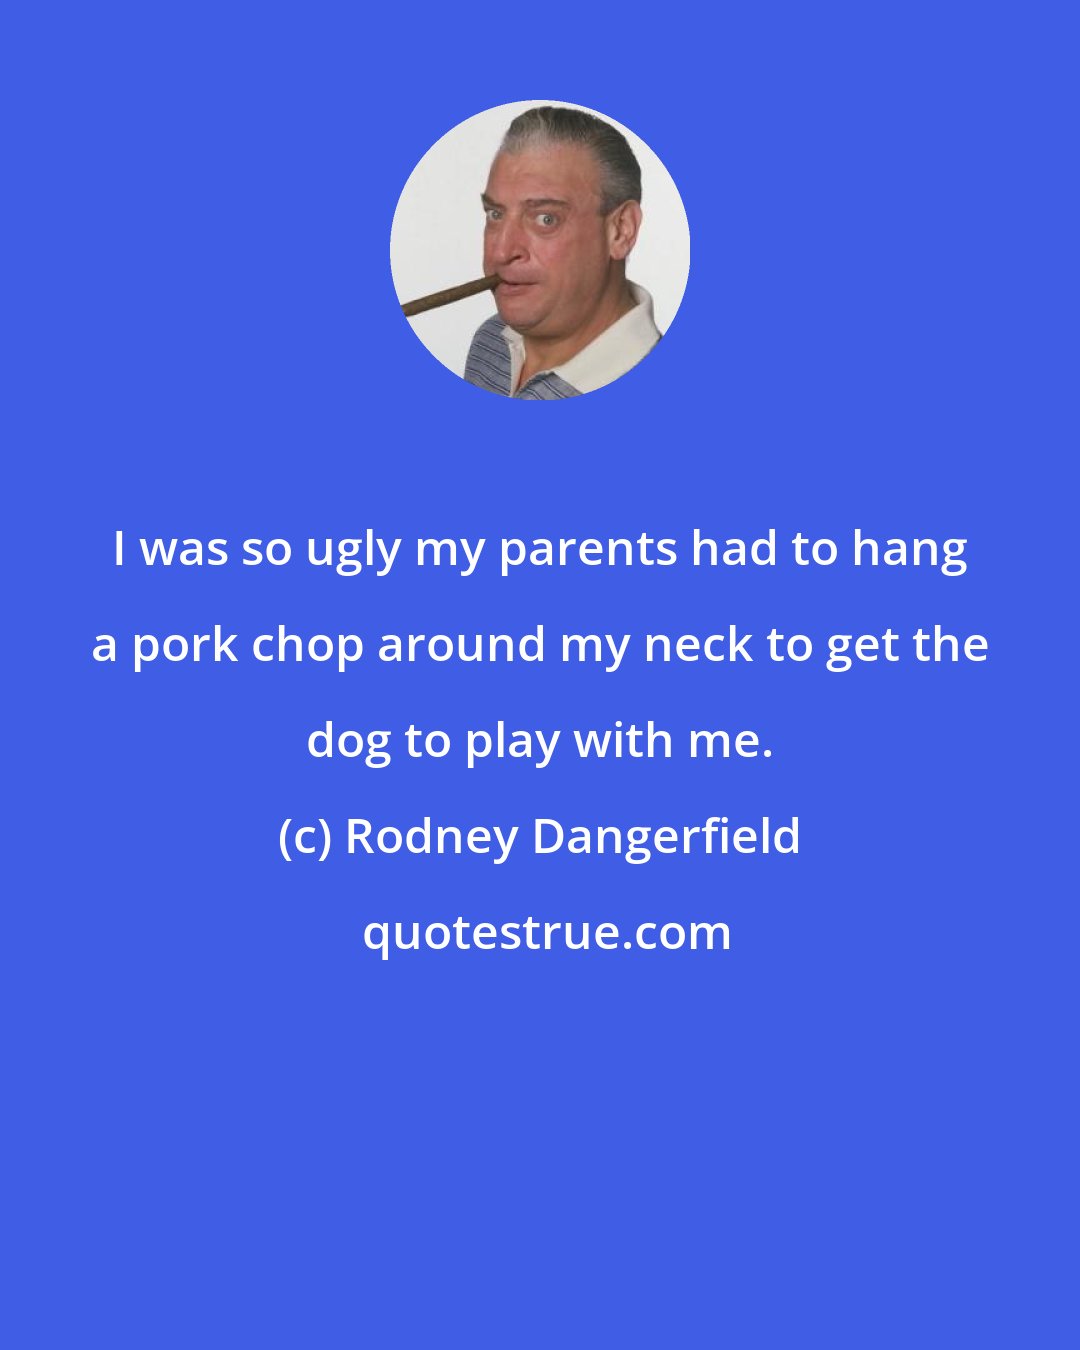 Rodney Dangerfield: I was so ugly my parents had to hang a pork chop around my neck to get the dog to play with me.